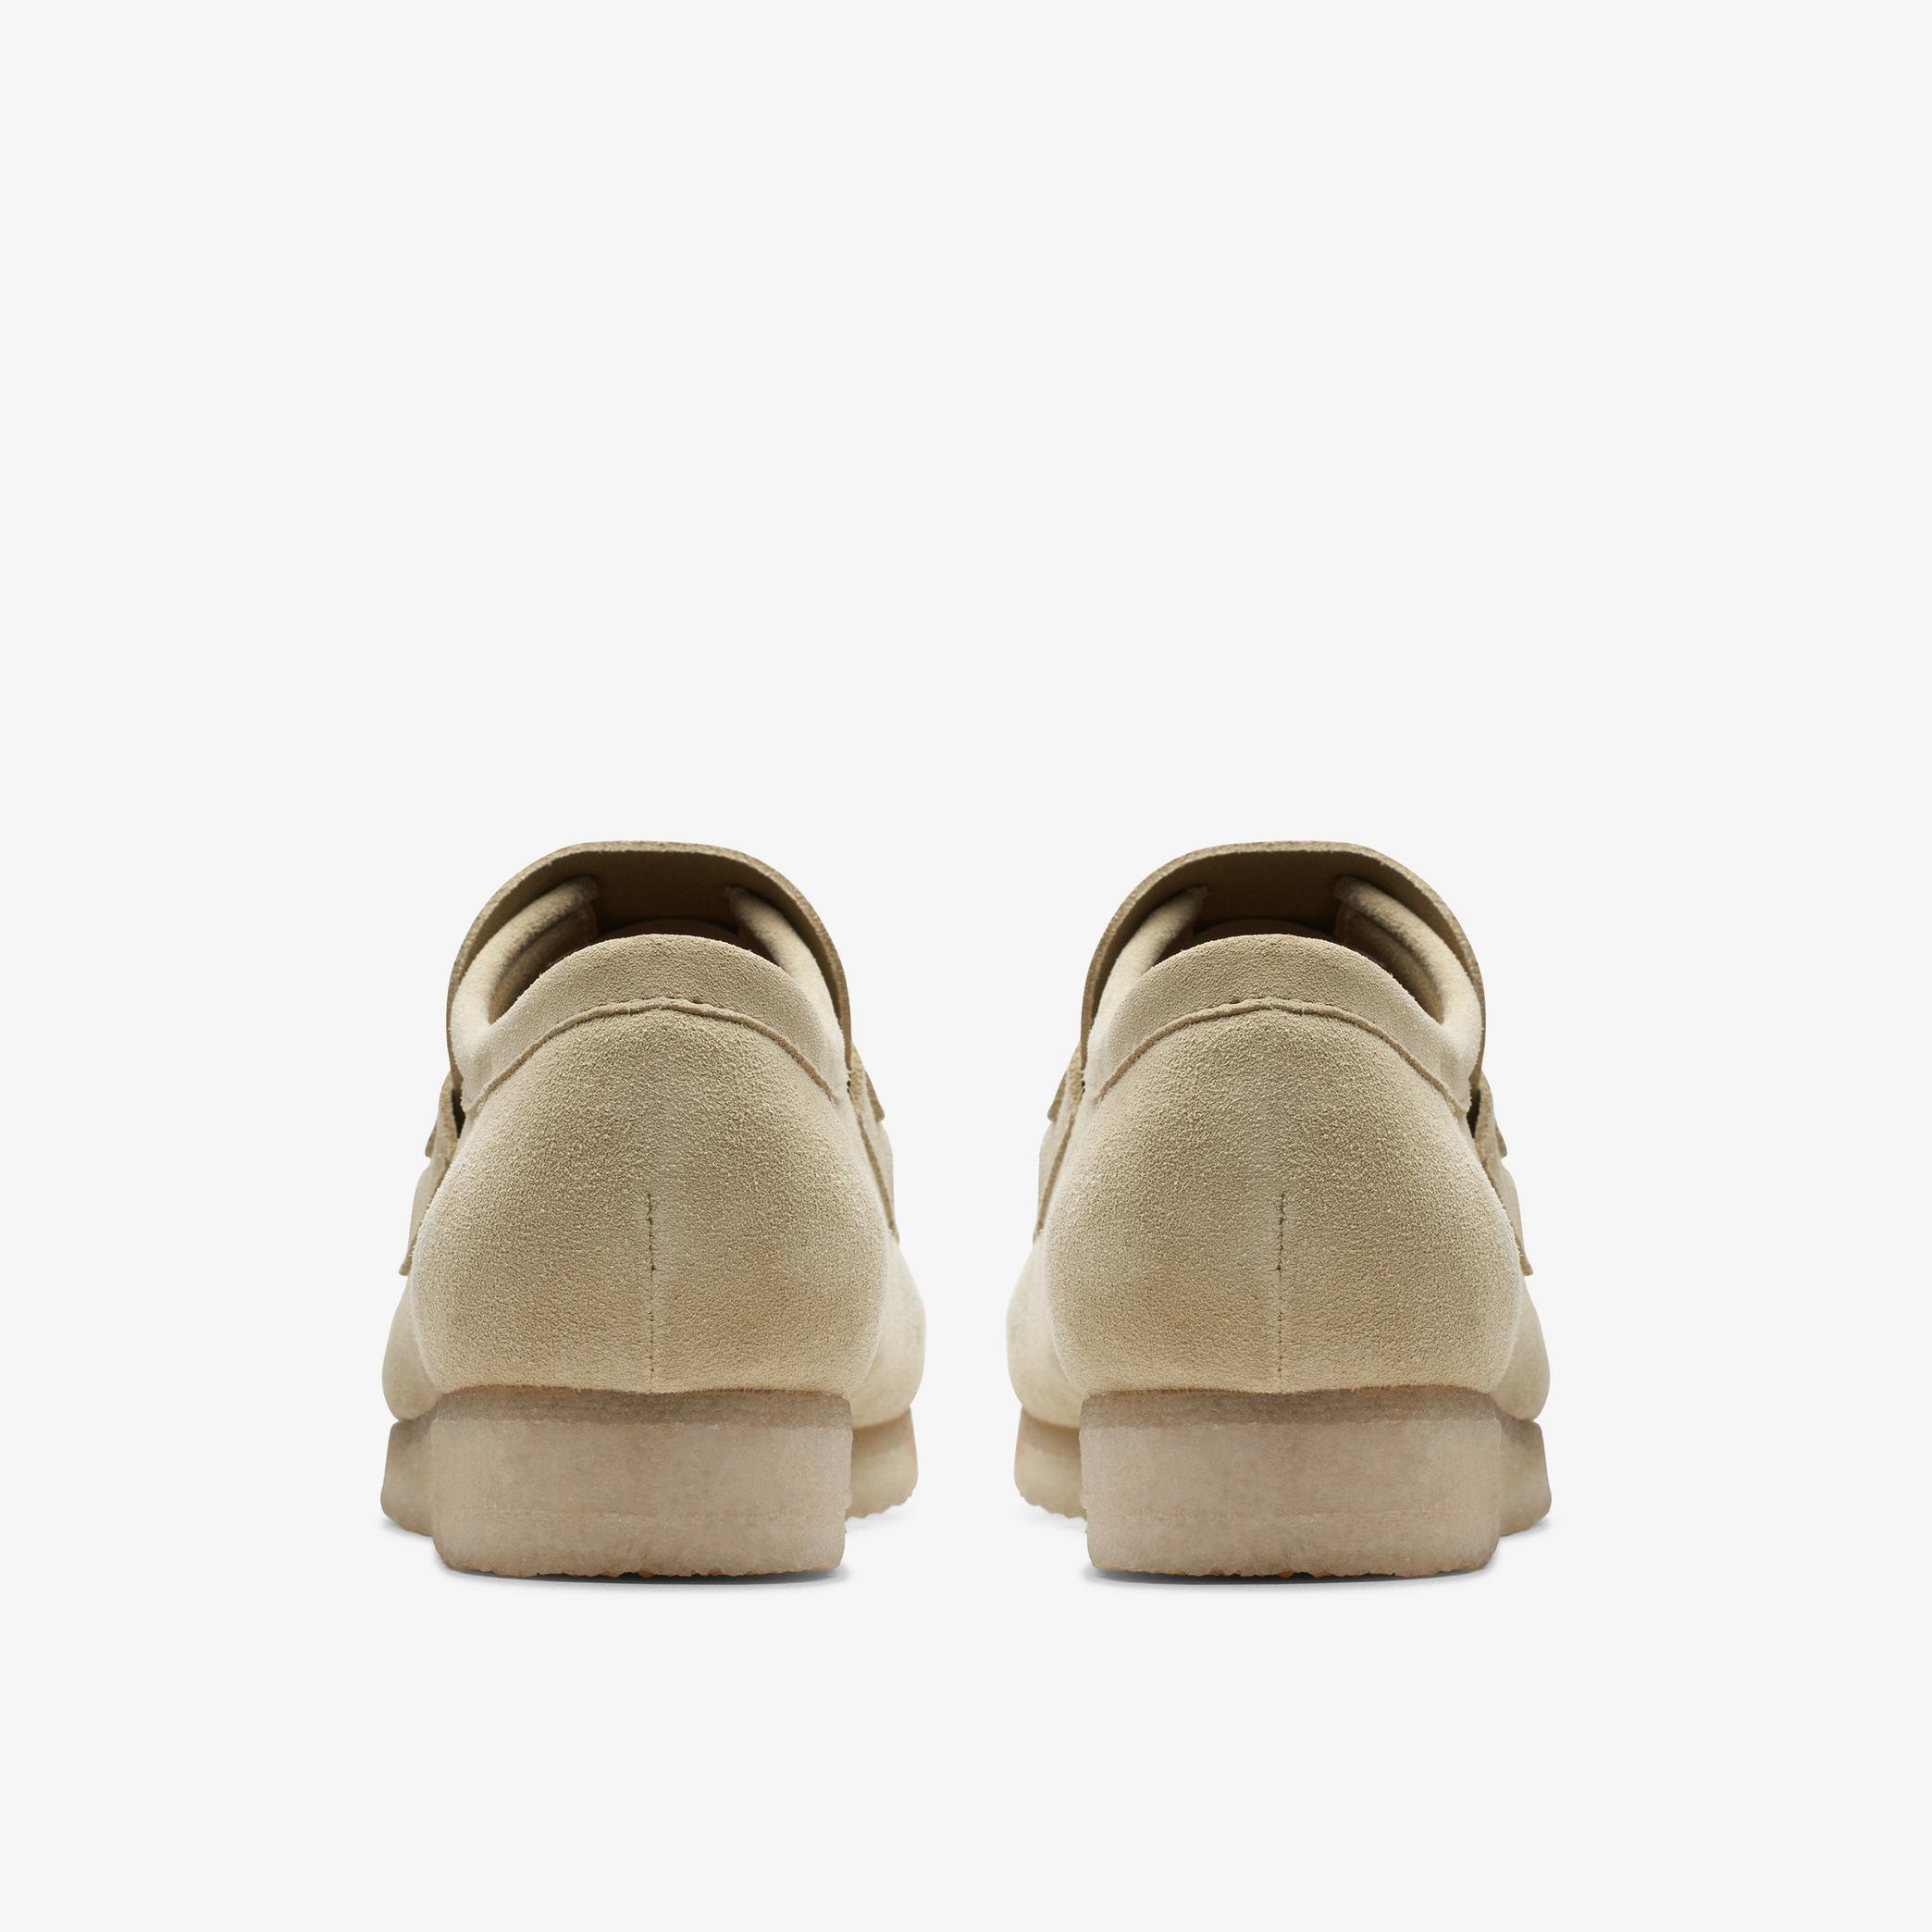 Wallabee Loafer Maple Suede Loafers, view 5 of 6